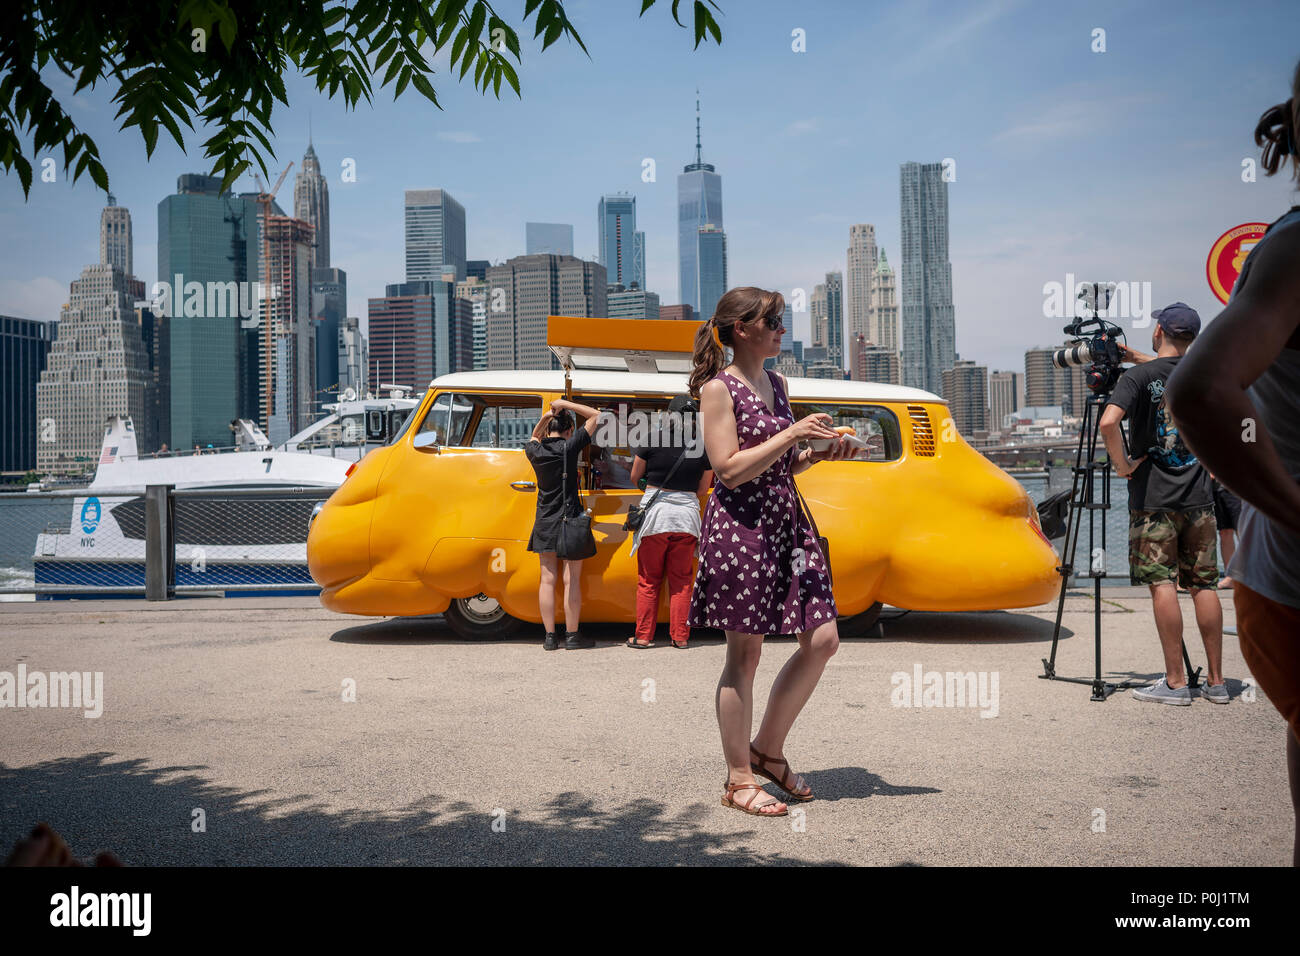 Brooklyn, USA. 9th June 2018. With the New York skyline behind them visitors to Brooklyn Bridge Park in New York delight in artist Erwin Wurm's 'Hot Dog Bus' serving free hot dogs to any and all, seen on opening day, Saturday, June 9, 2018. The Austrian artist modified a vintage Volkswagen Microbus into a bulbous bright yellow food truck, redefining the dichotomy between commerce and sculpture, albeit serving free iconic New York street food. The truck was previously the 'Curry Bus' serving wursts in Europe. Credit: Richard Levine/Alamy Live News Stock Photo